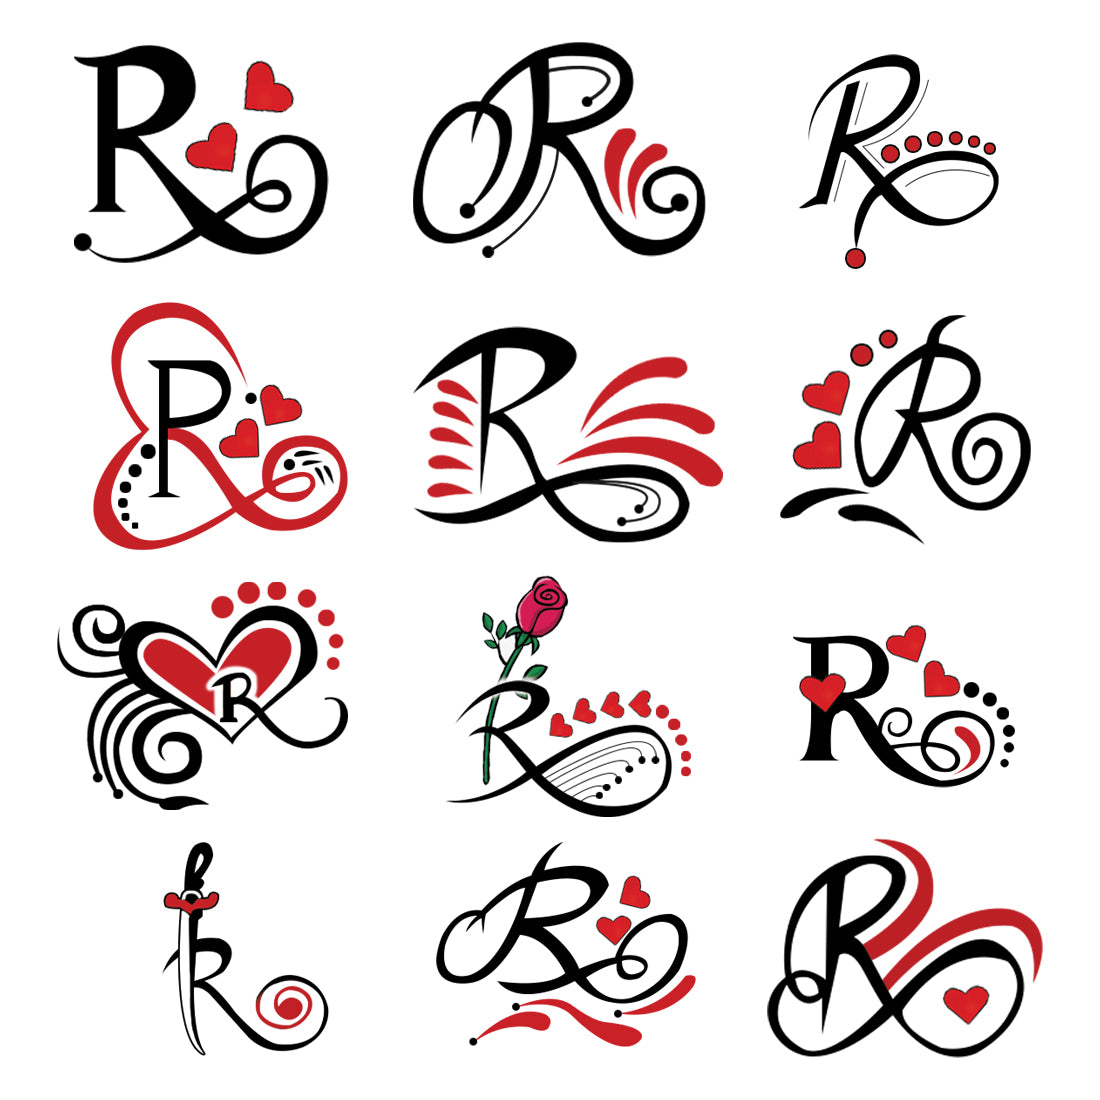 R Letter Tattoo Design Ideas For Girls  Simple R Letter Tattoos For Women   Womens Tattoos  YouTube